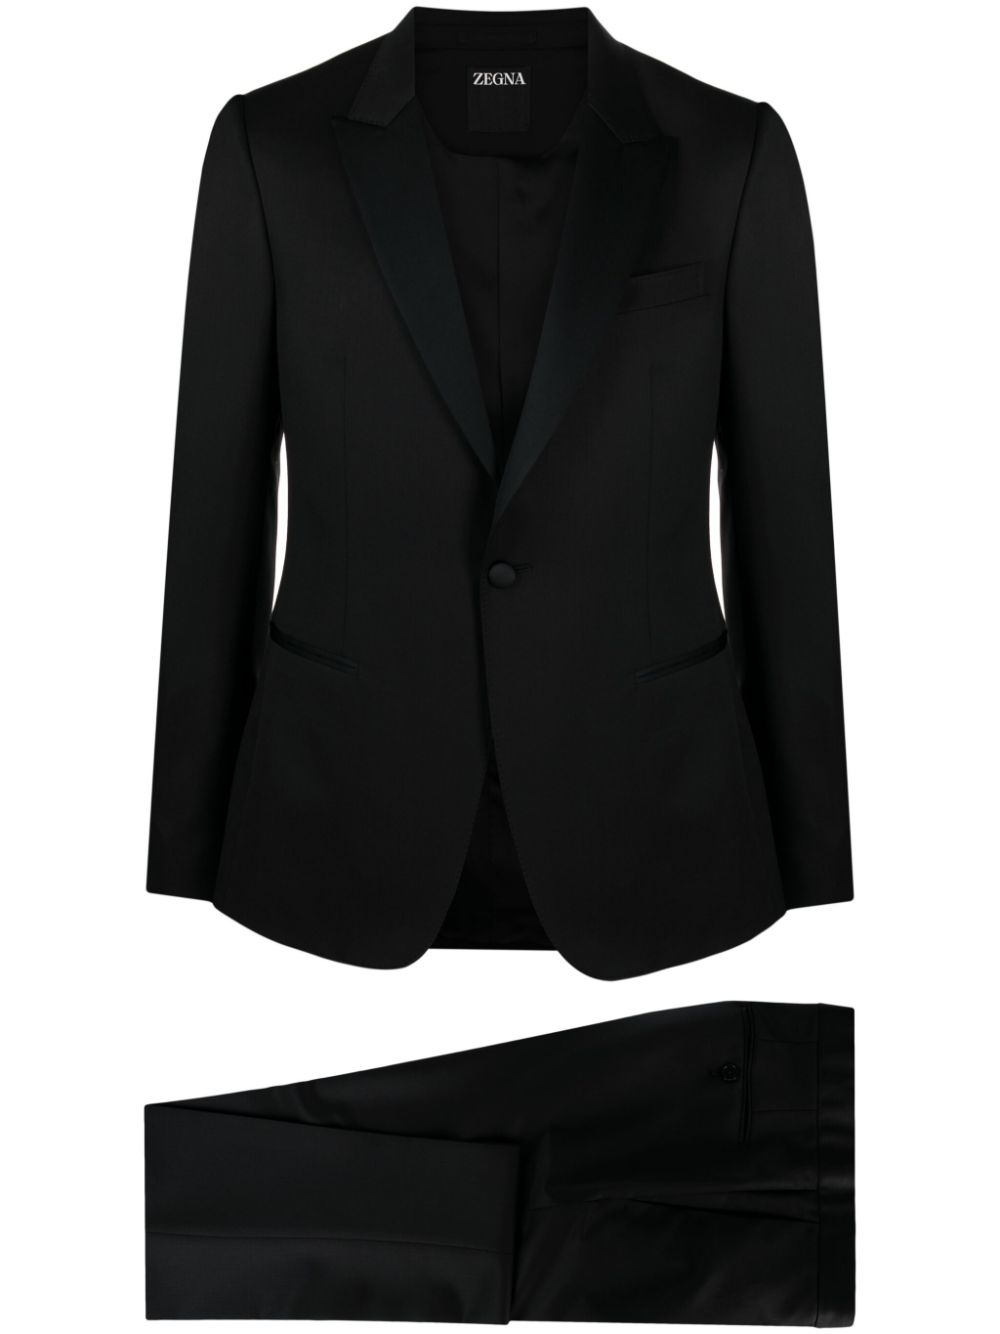 ZEGNA SATIN-TRIM SINGLE-BREASTED SUIT